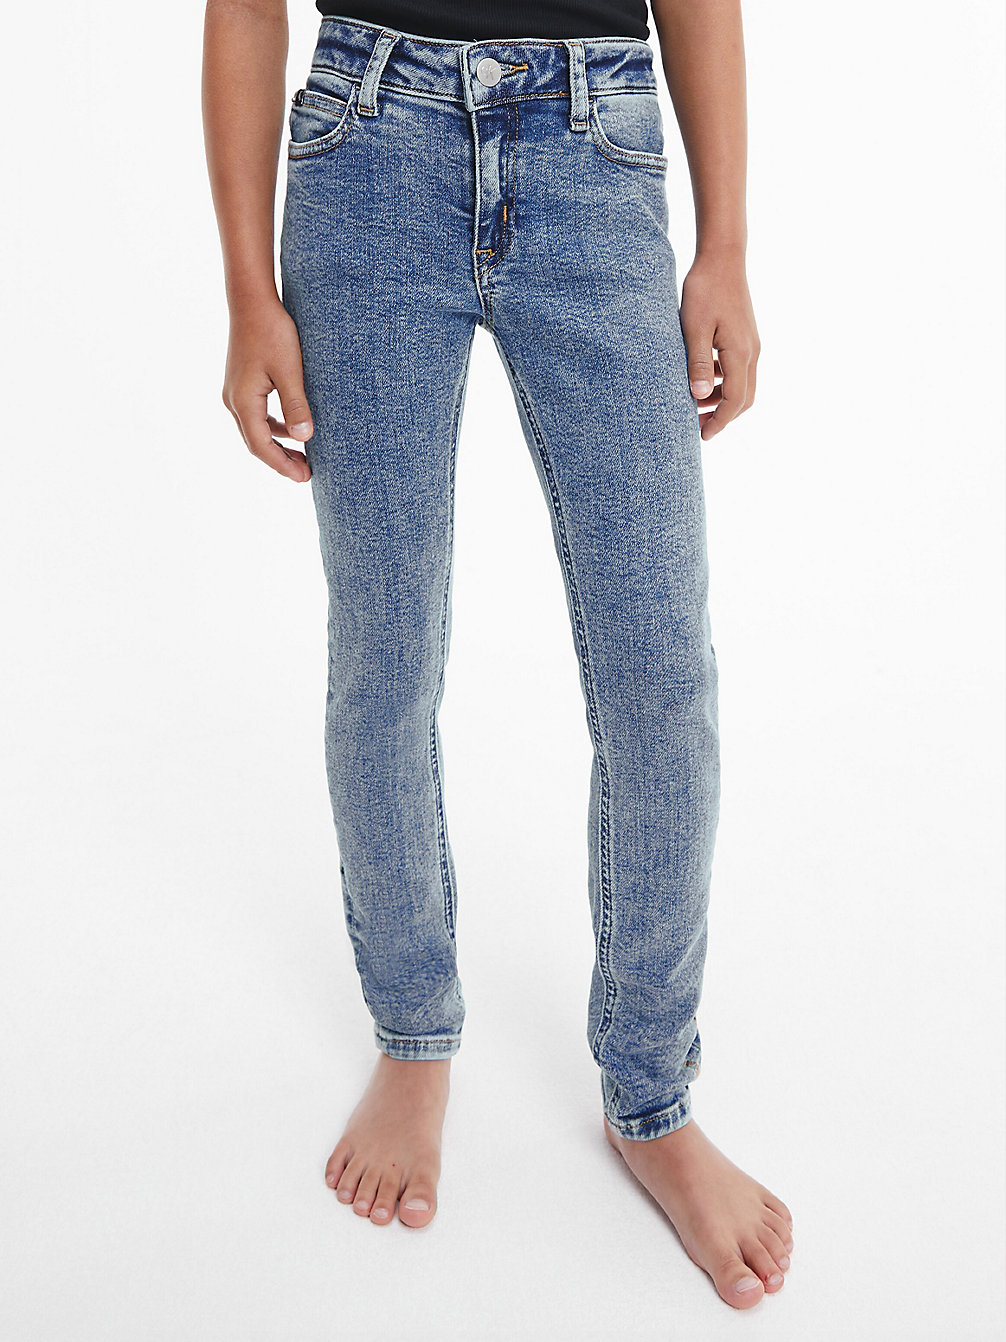 STONE WASH MID BLUE > Mid Rise Skinny Jeans > undefined girls - Calvin Klein